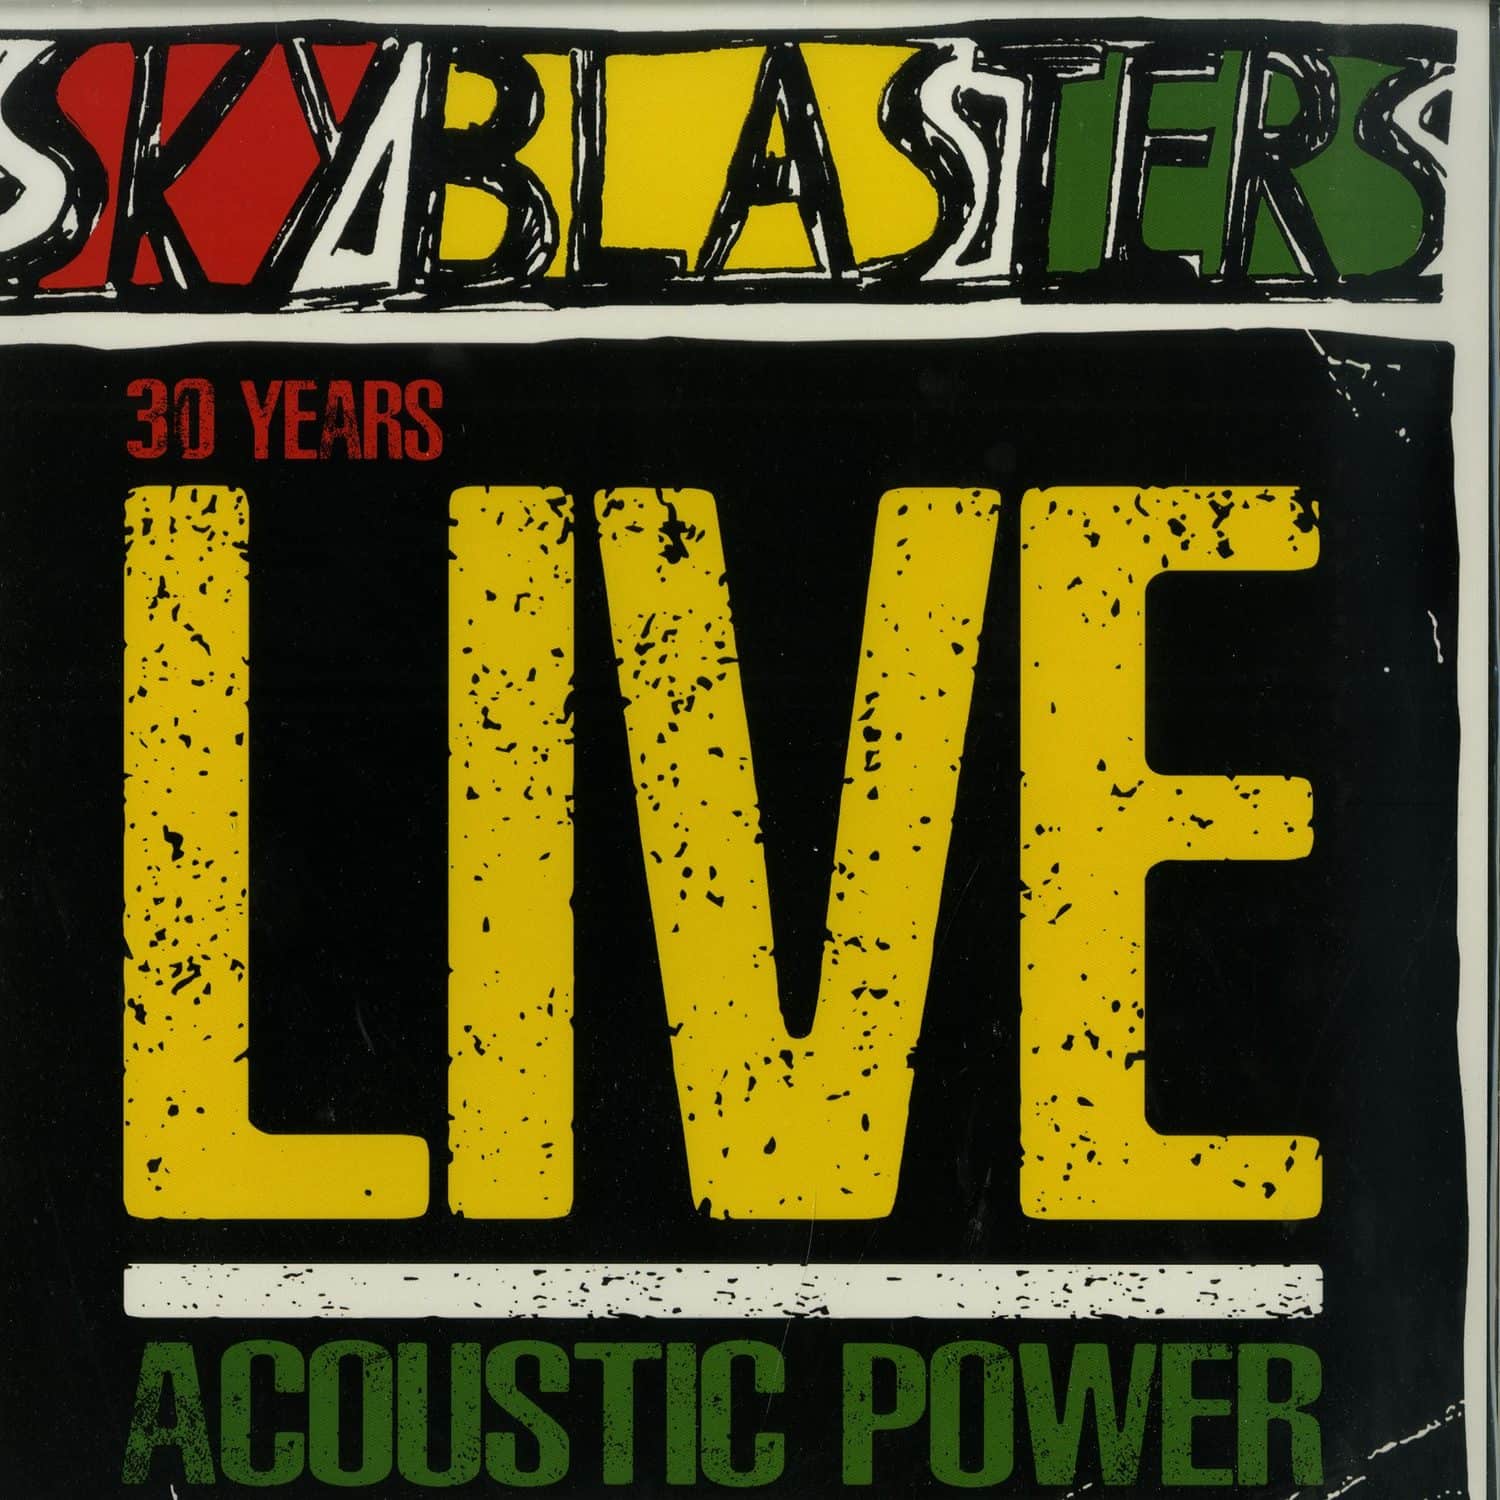 Skyblasters - 30 YEARS LIVE ACOUSTIC POWER 